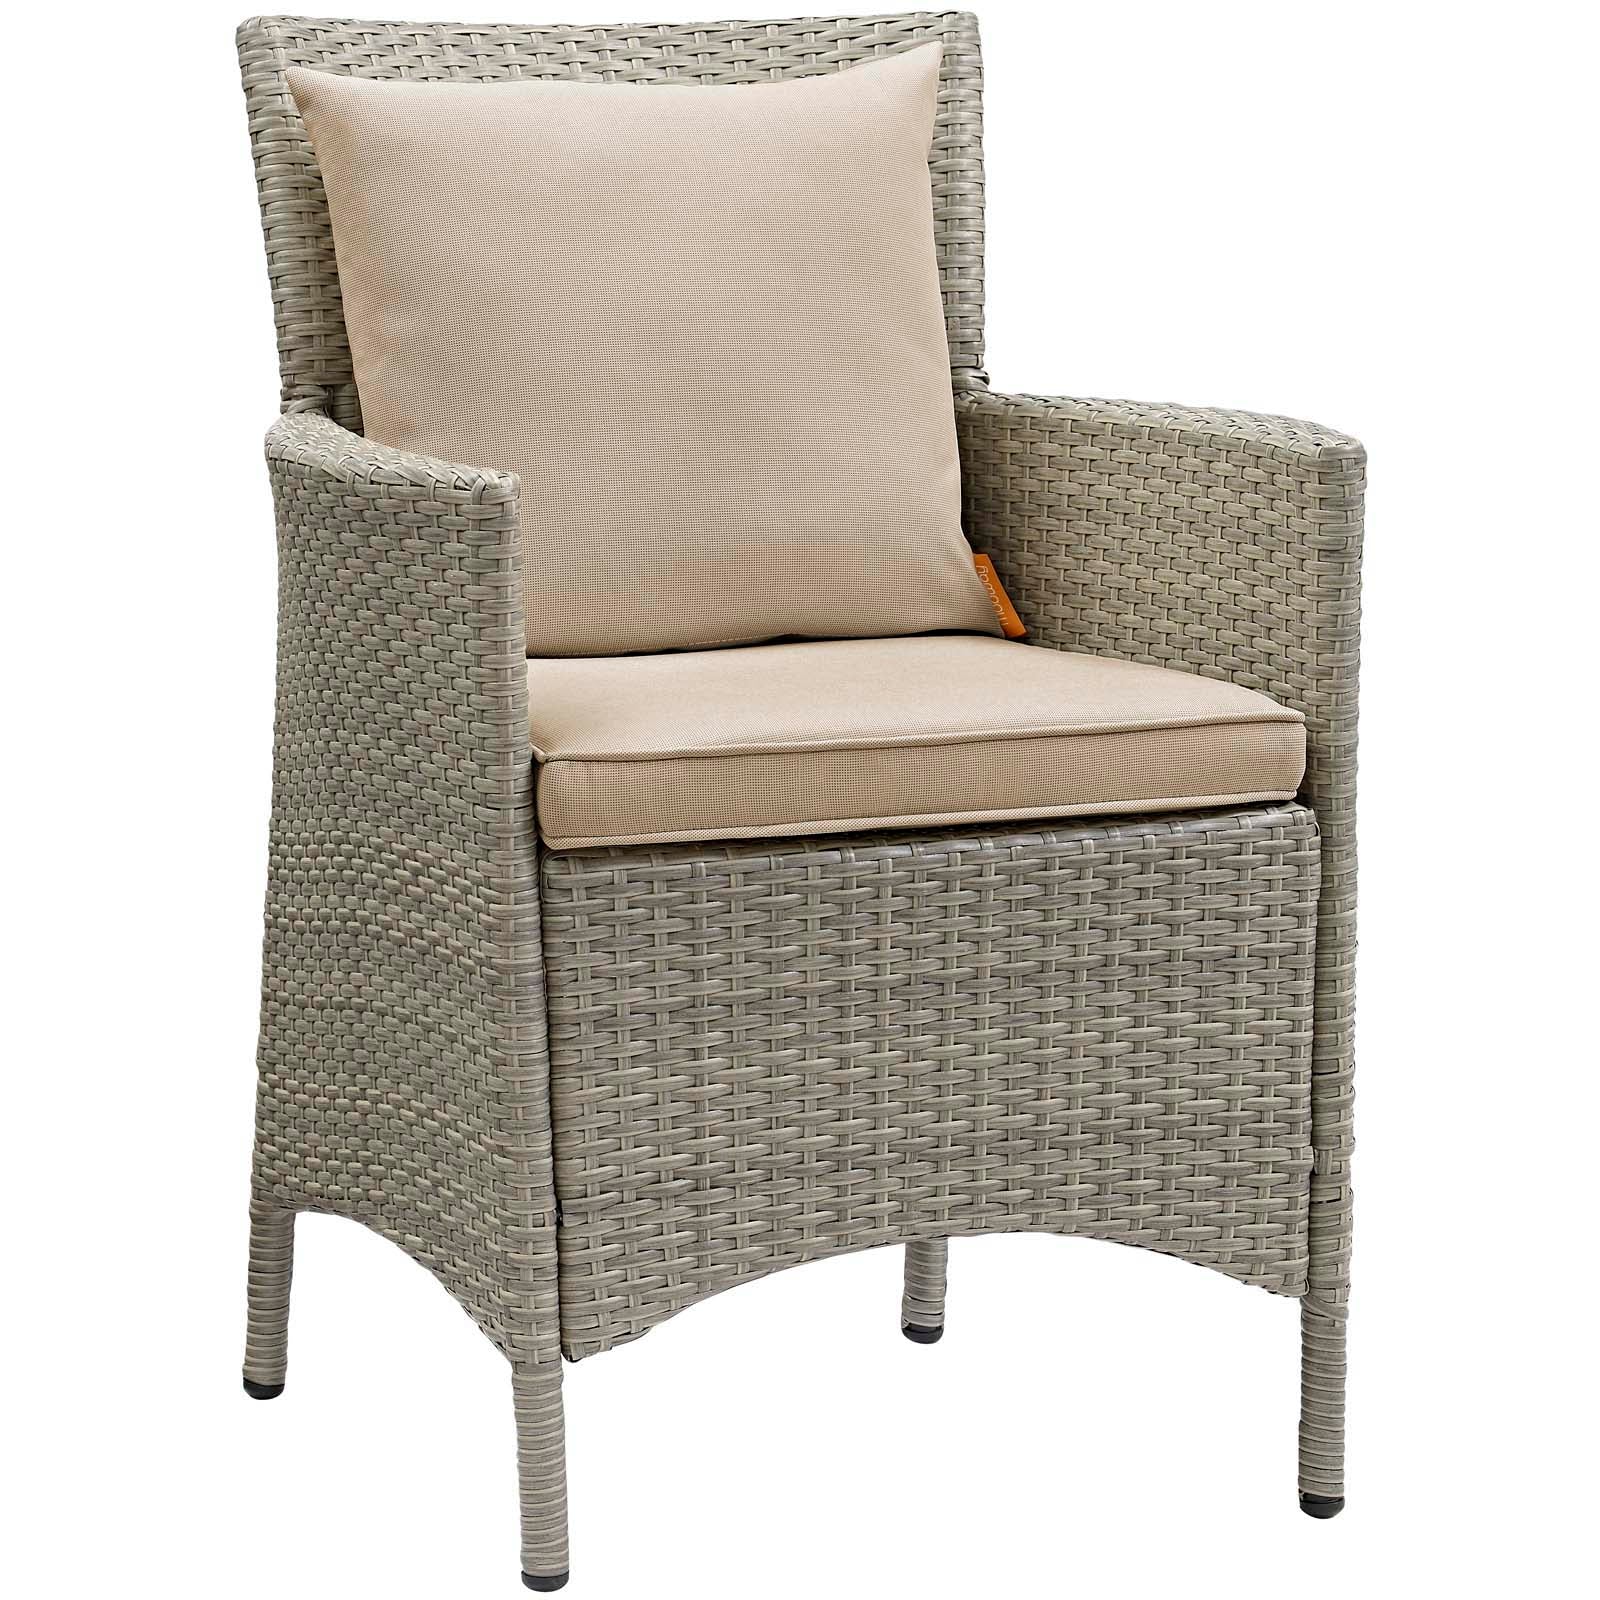 Modway Outdoor Dining Chairs - Conduit Outdoor Patio Wicker Rattan Dining Armchair Set of 4 Light Gray Beige